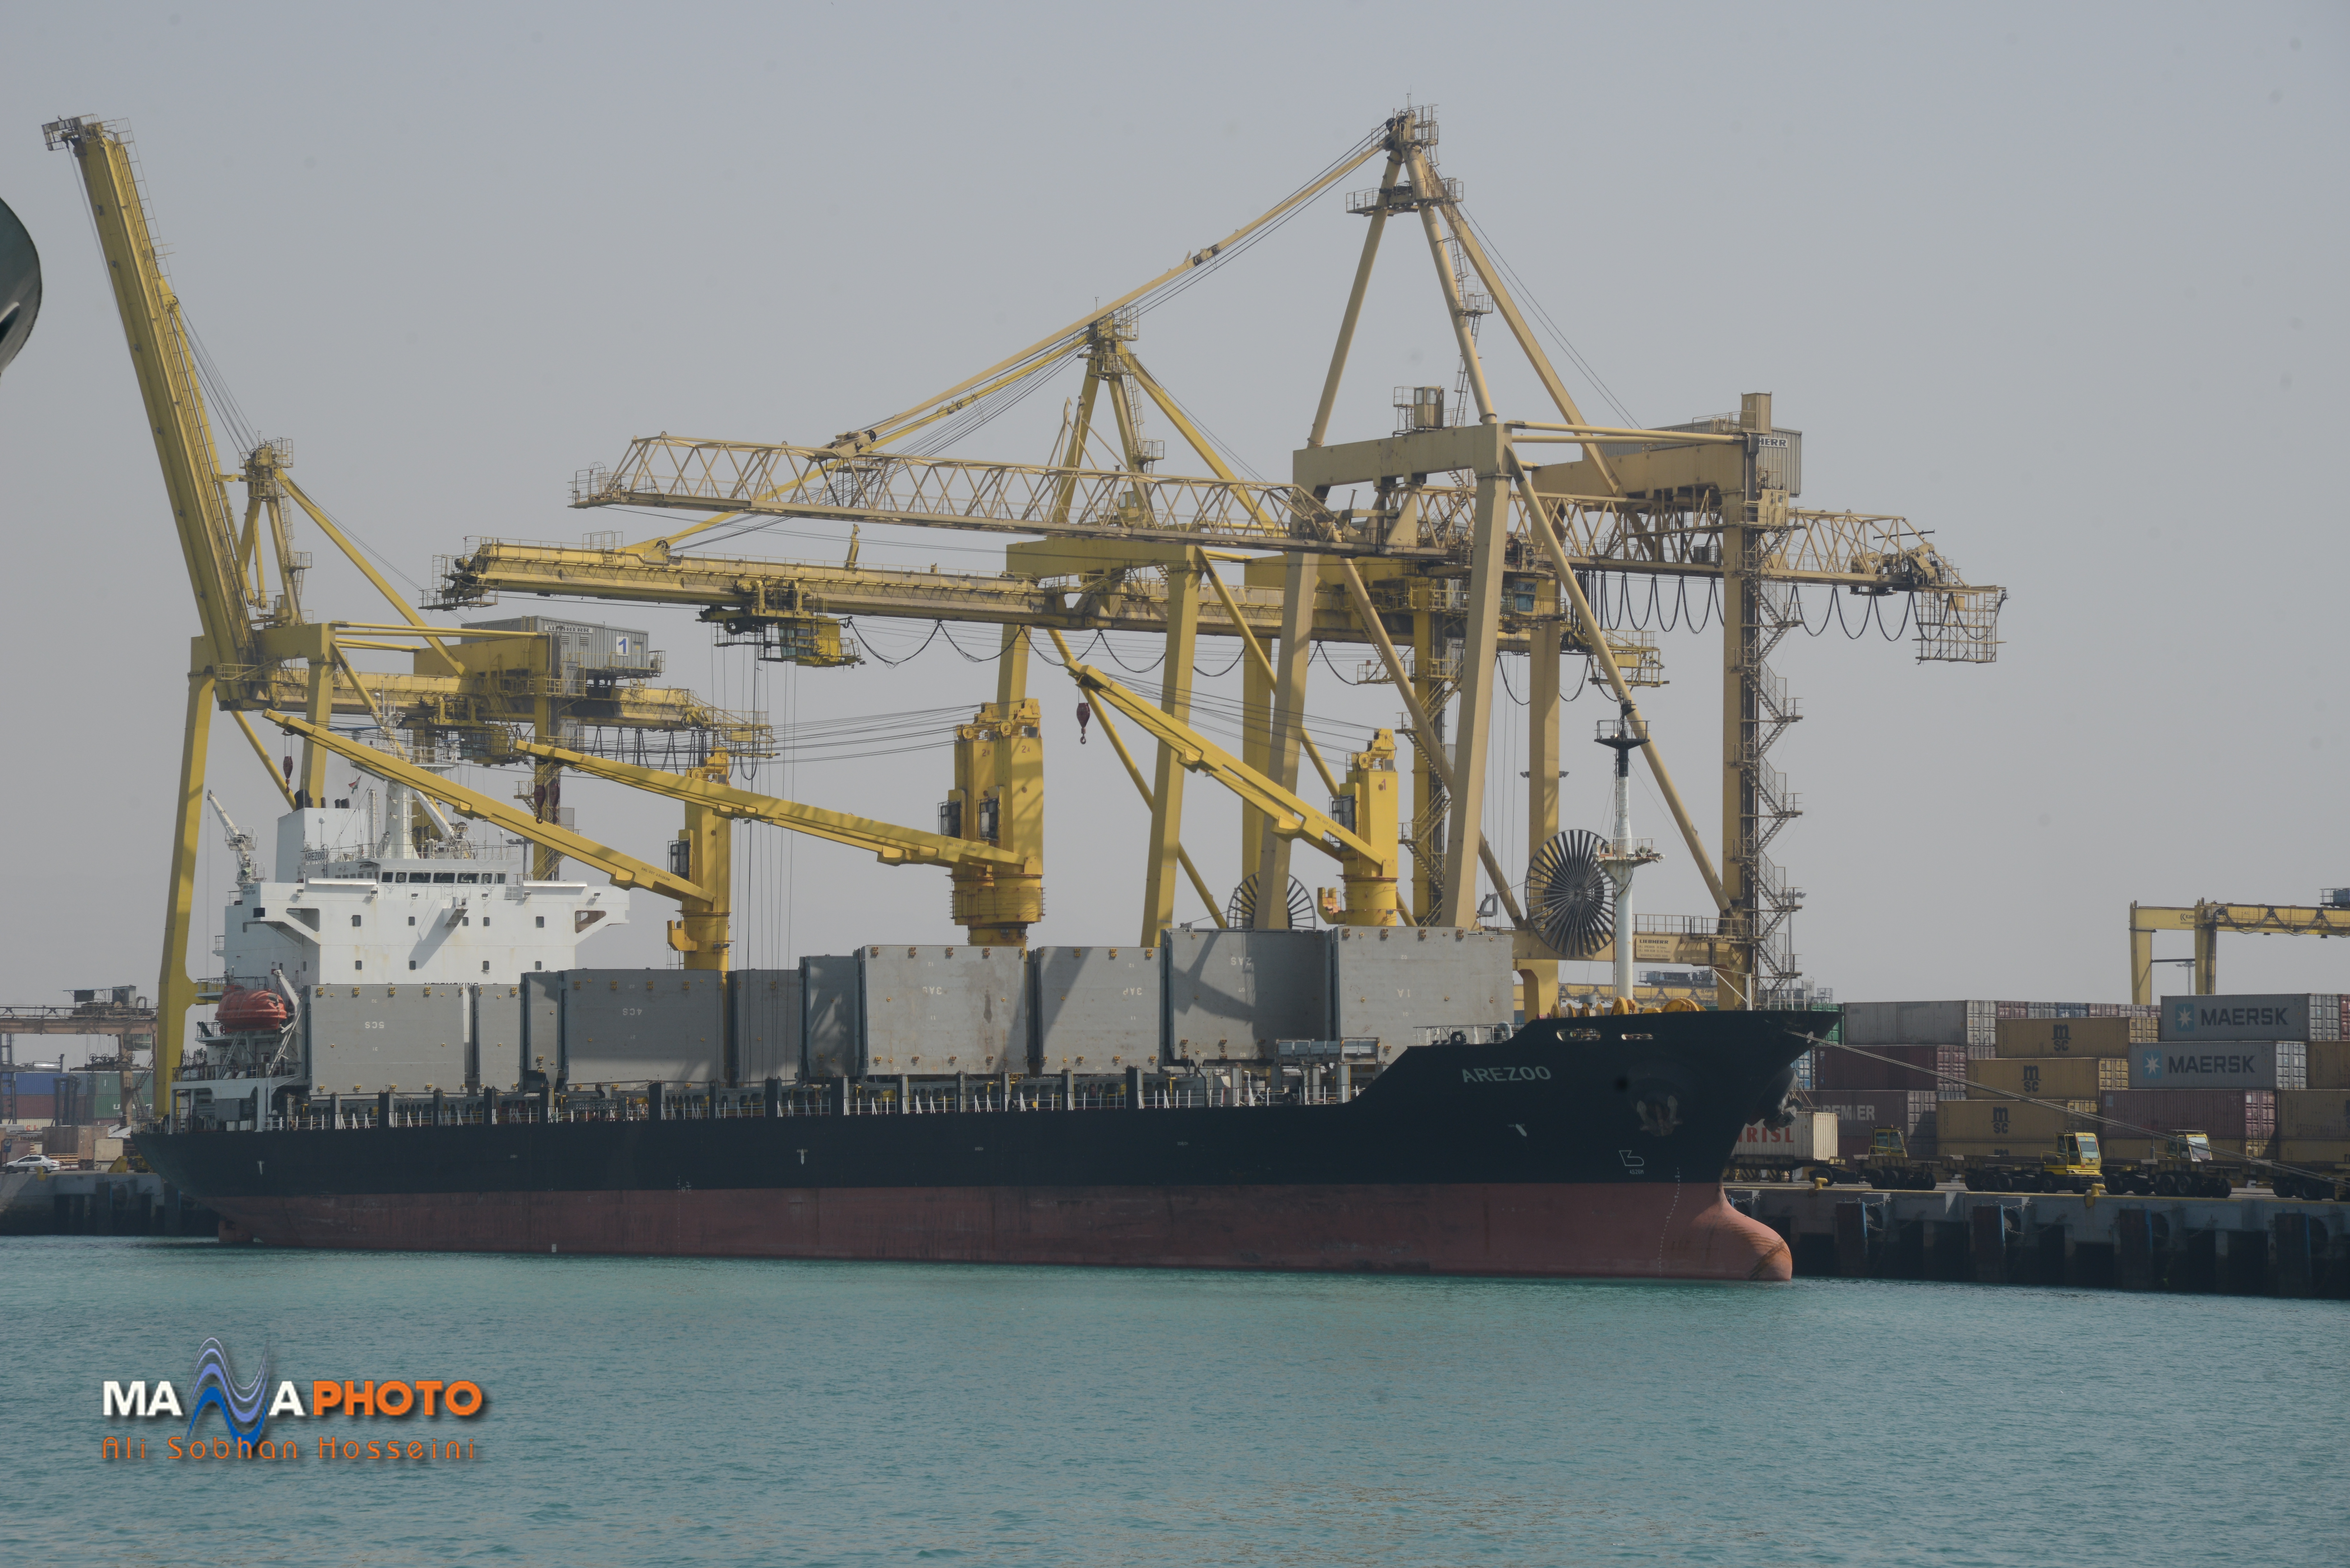 Shahid Rajaee port in picture frame